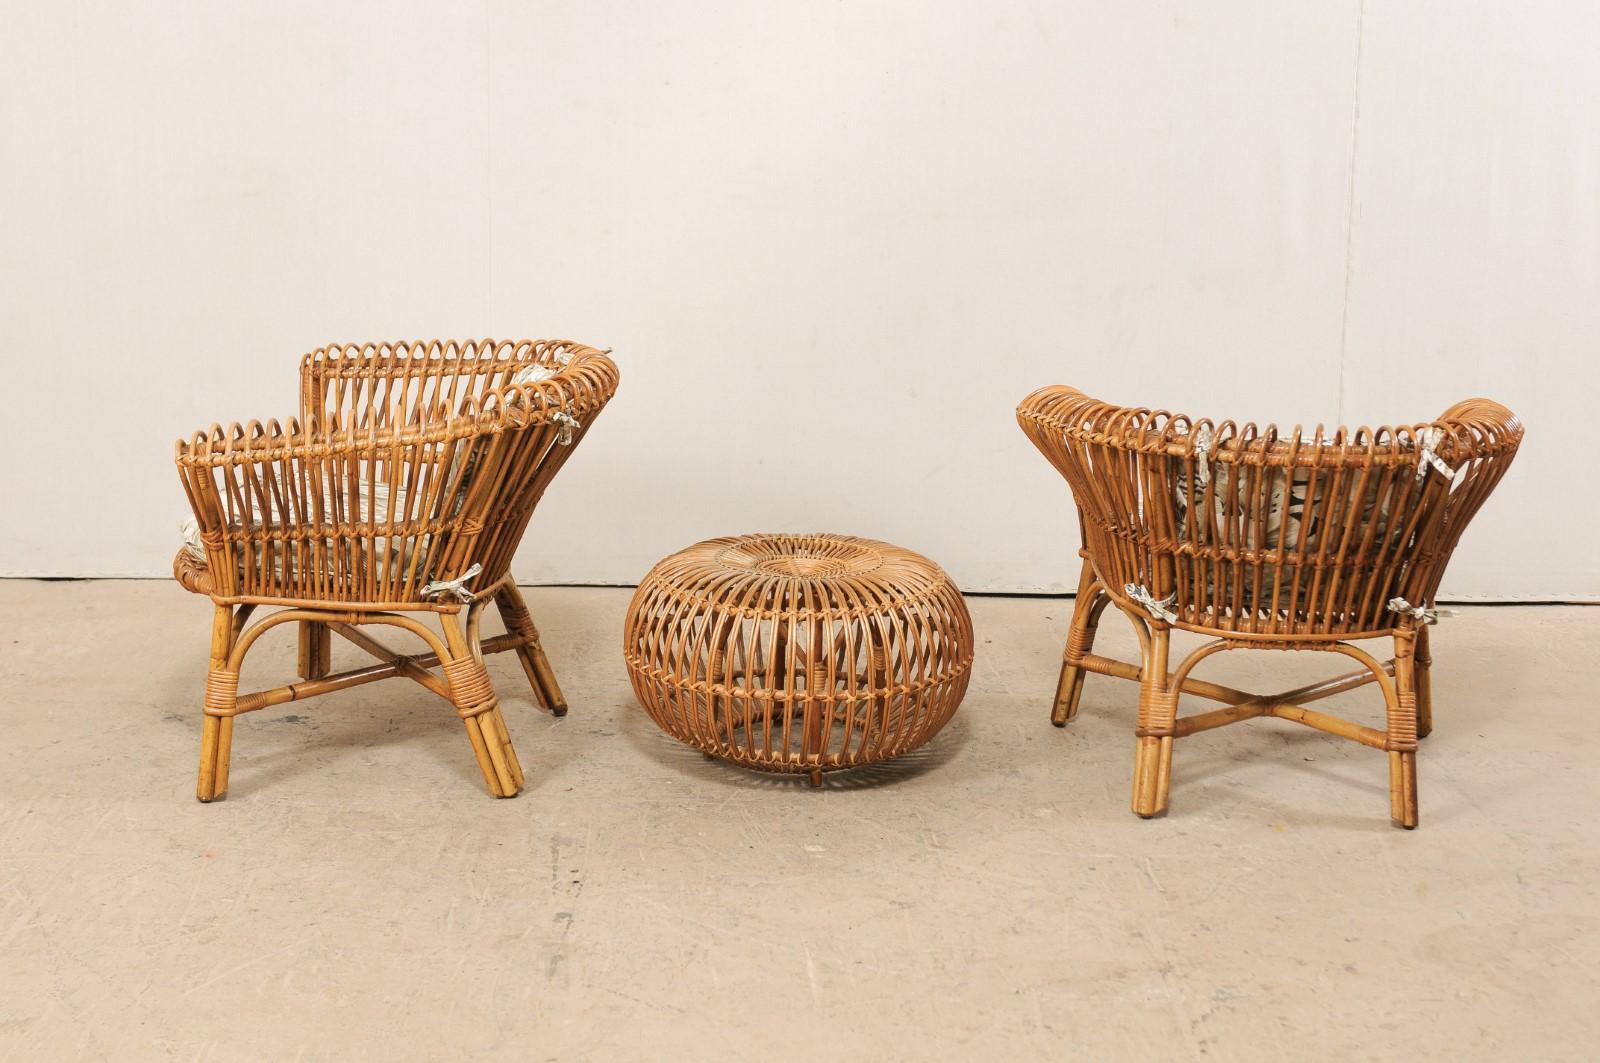 Linen Pair of Vintage Rattan Chairs and Ottoman Patio Set